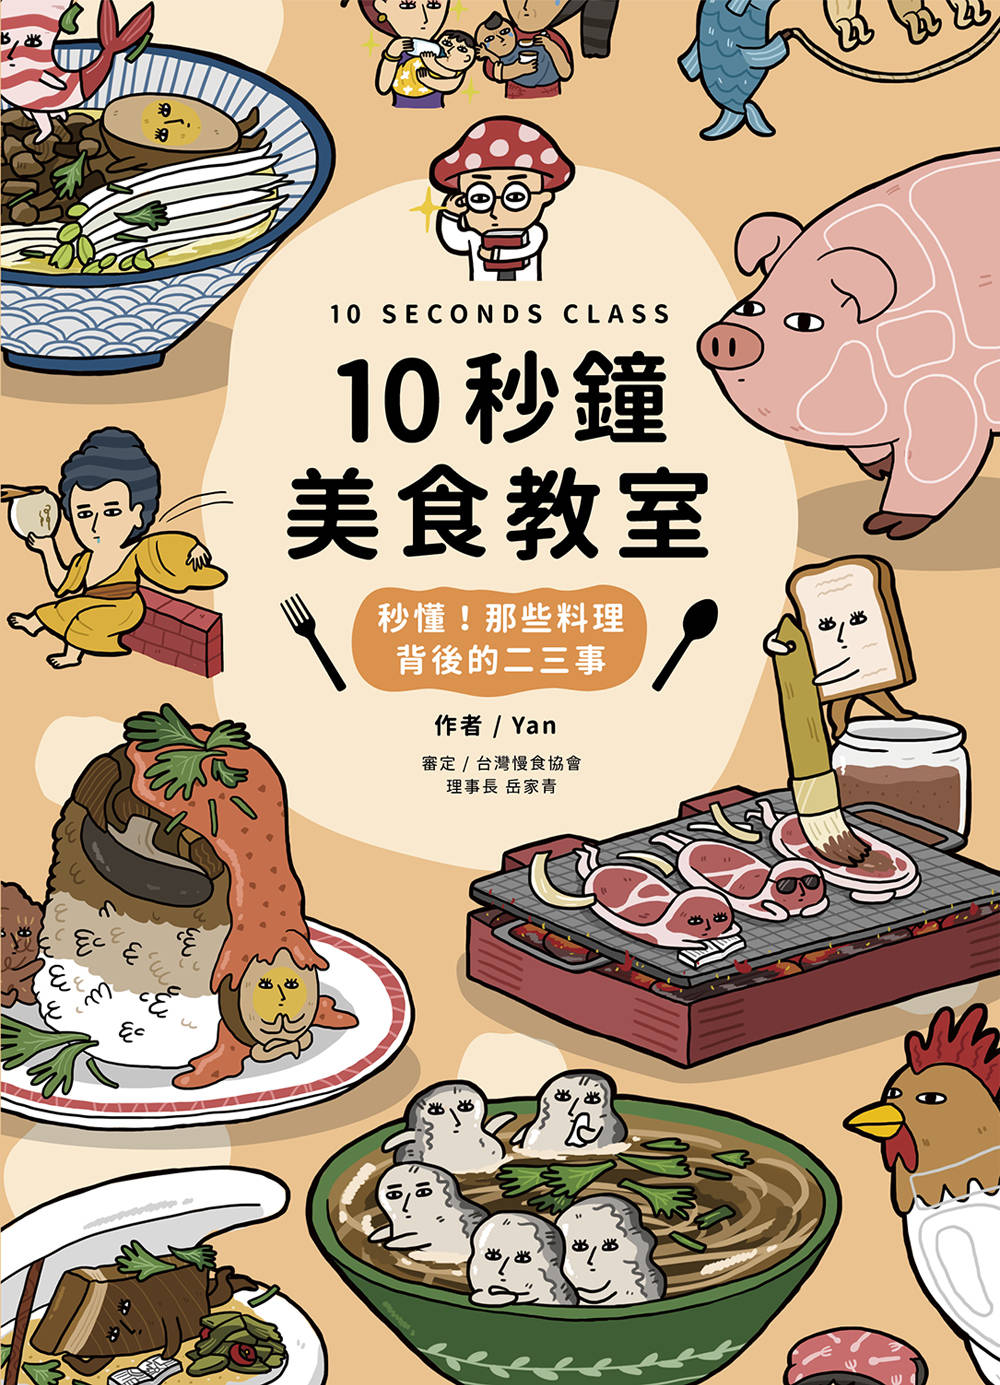 10 Seconds Class! The Little Things Behind the Art of Food • 10秒鐘美食教室：秒懂！那些料理背後的二三事